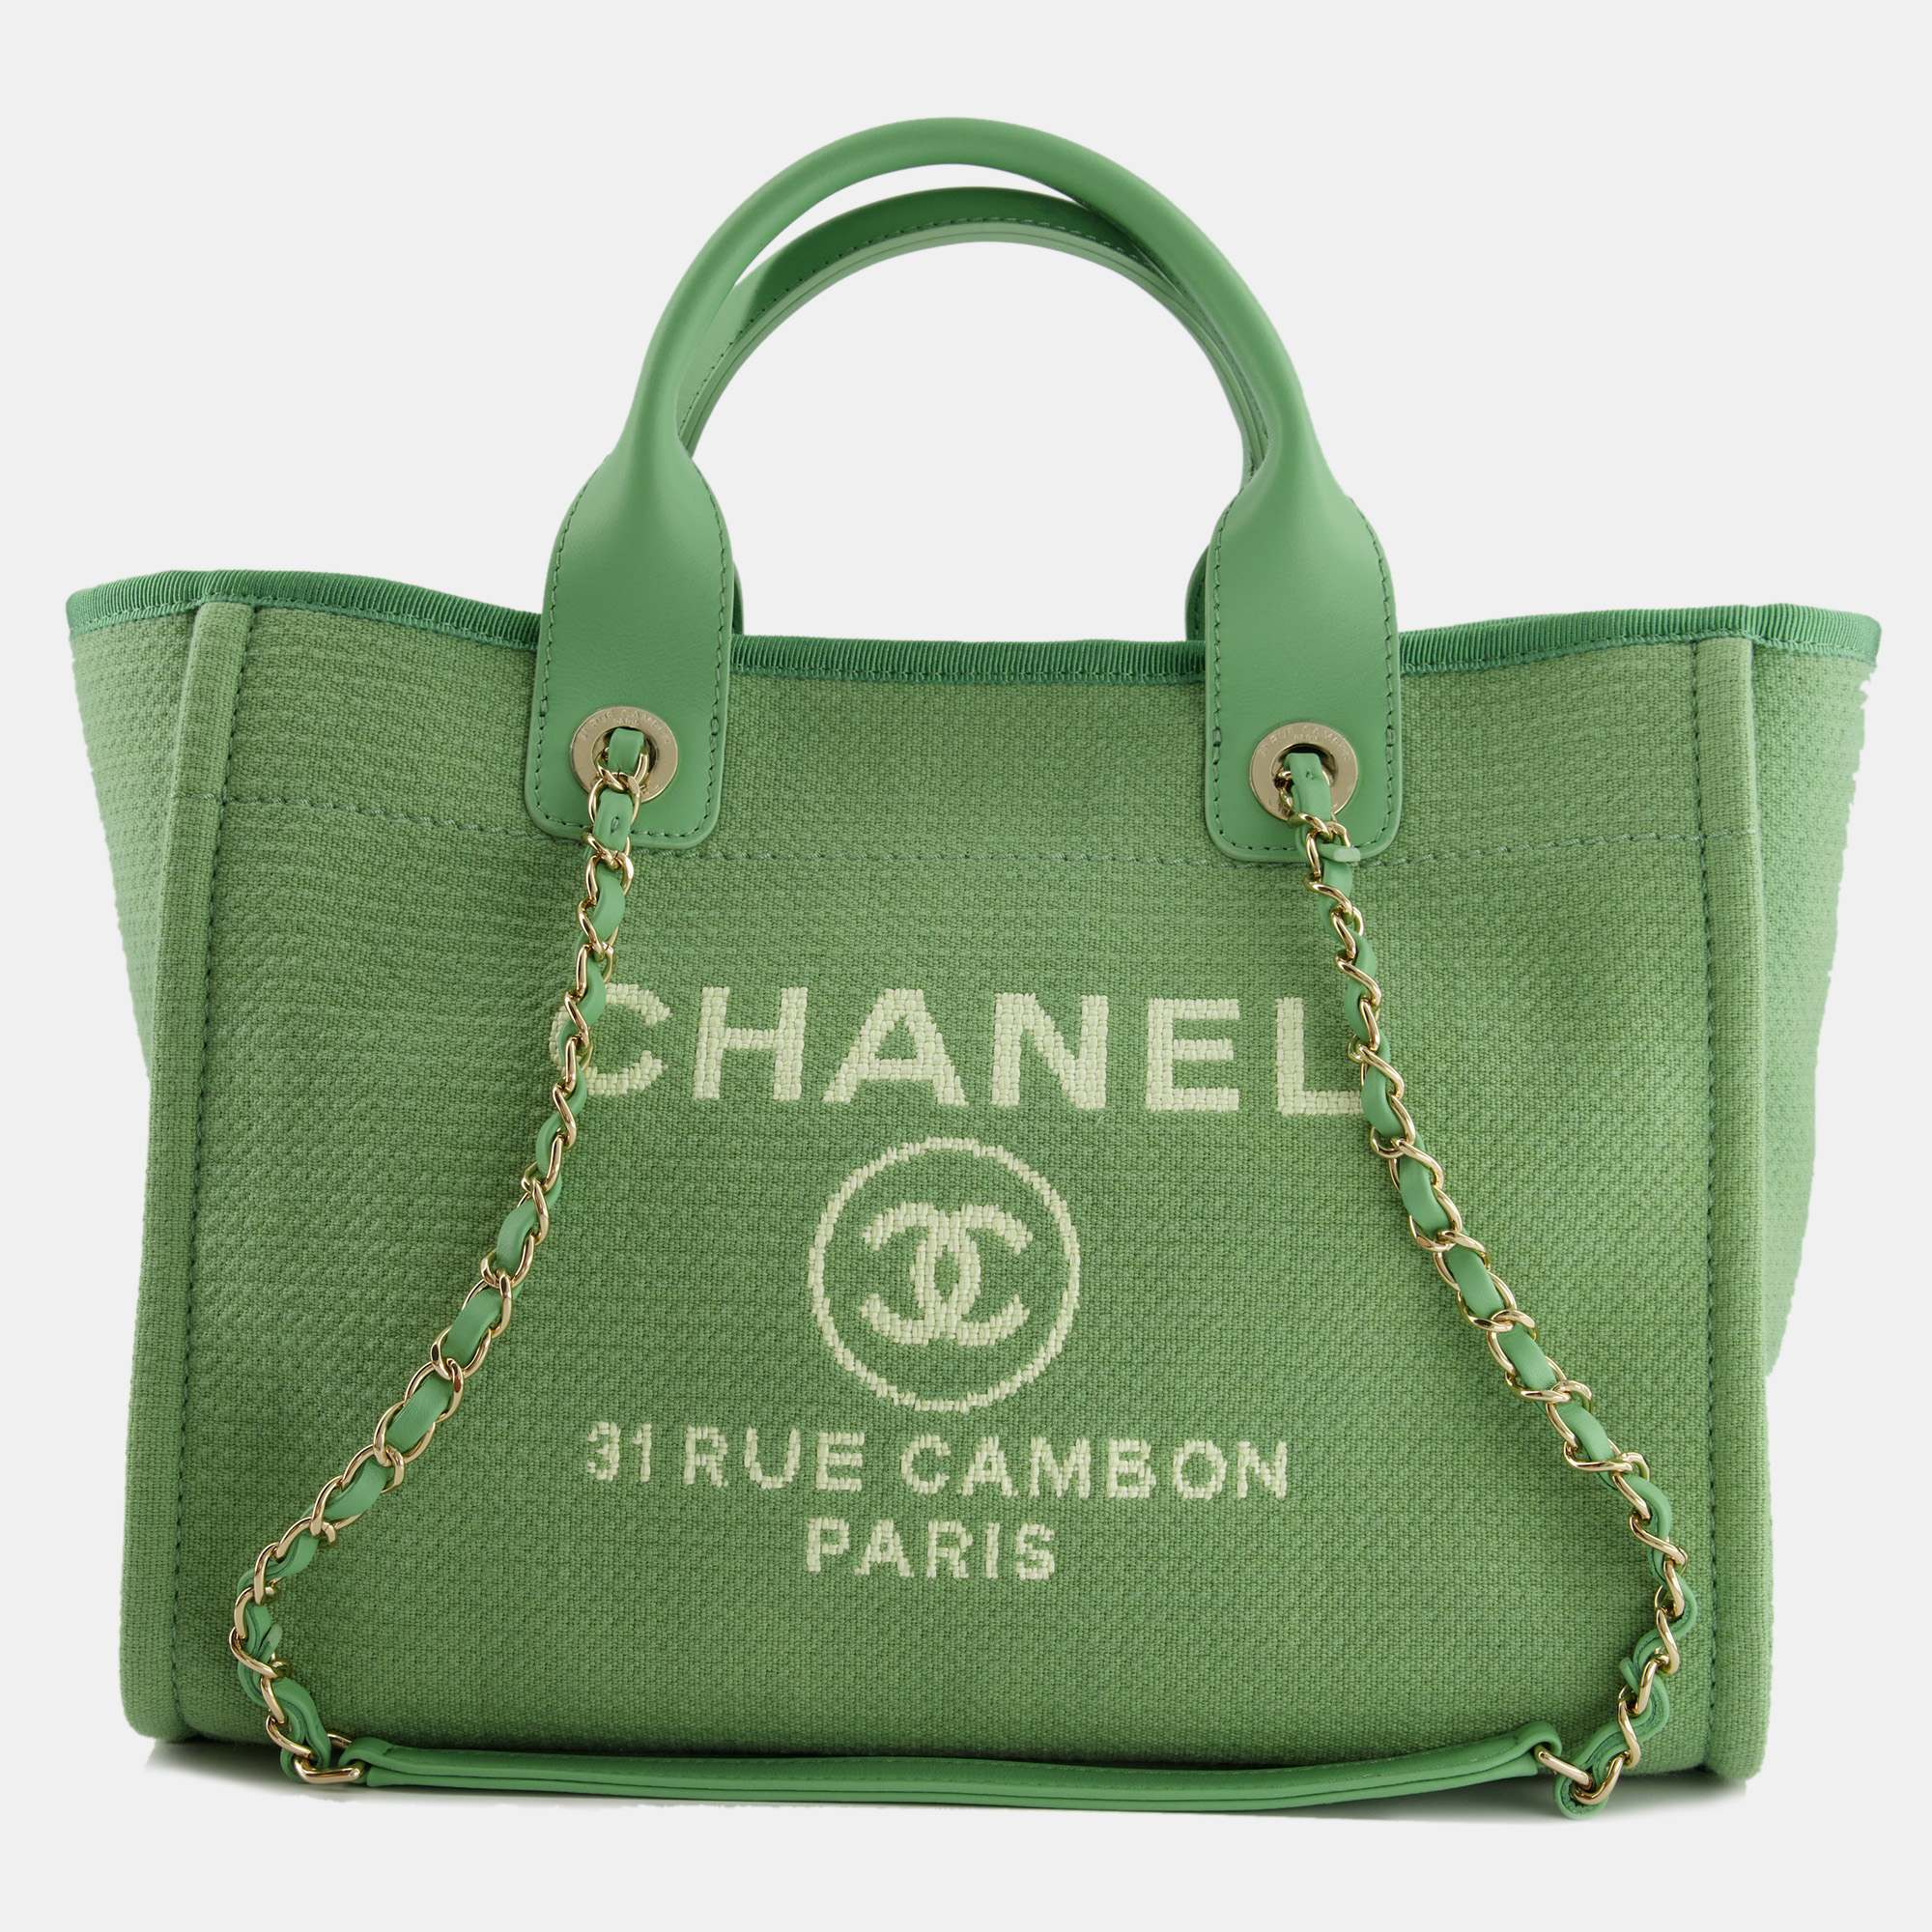 Chanel pistachio green canvas small deauville tote bag with champagne gold hardware